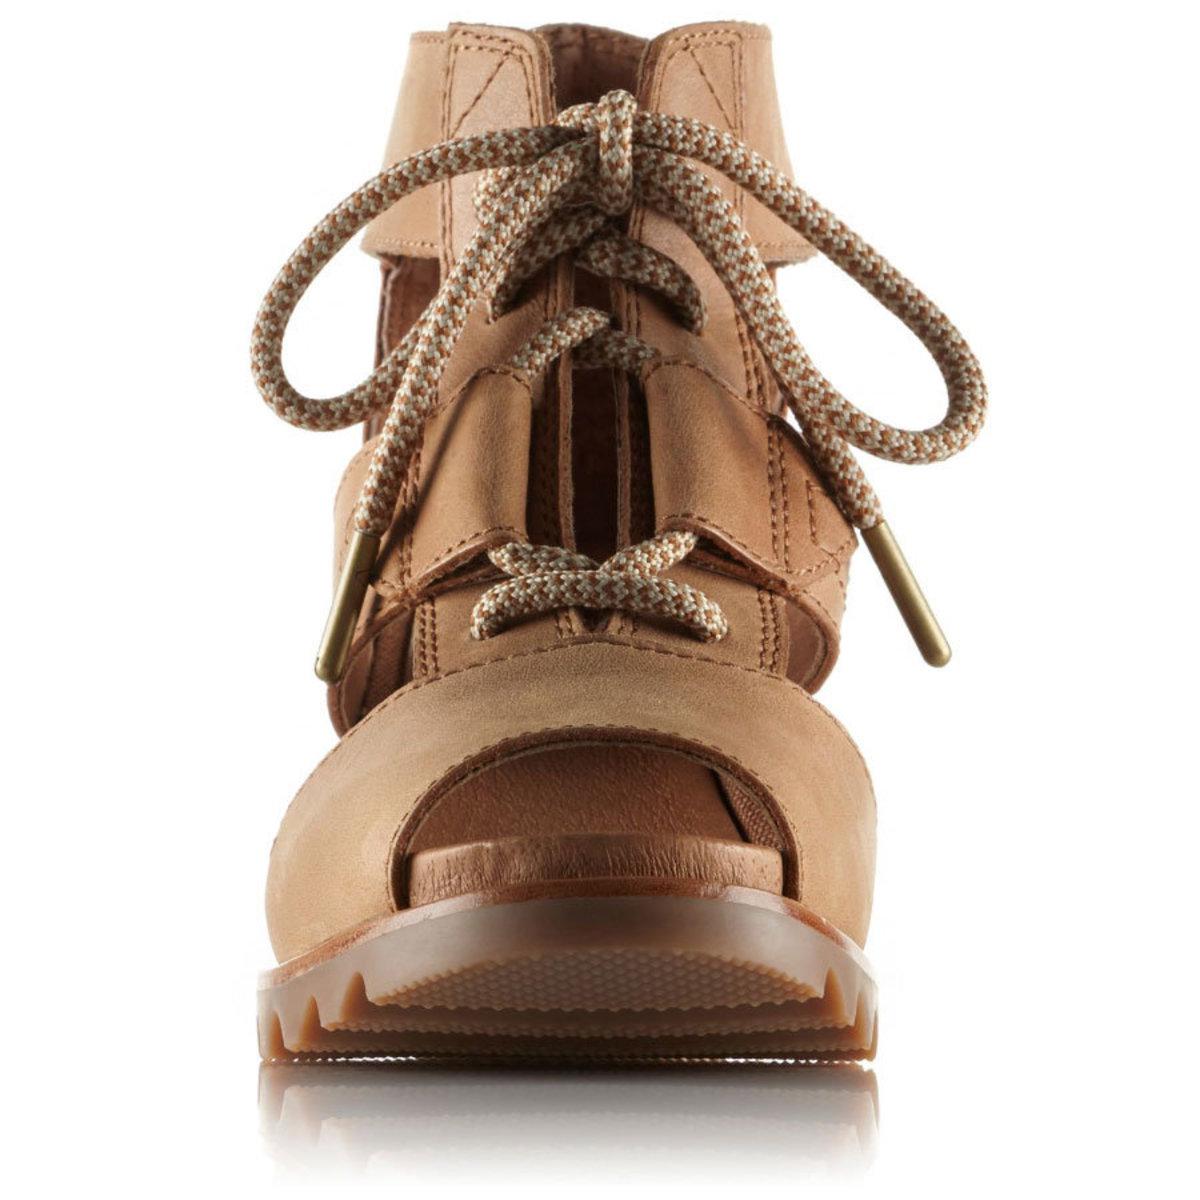 Sorel Leather Joanie Lace Up Wedge Sandal in Camel Brown (Brown) - Lyst